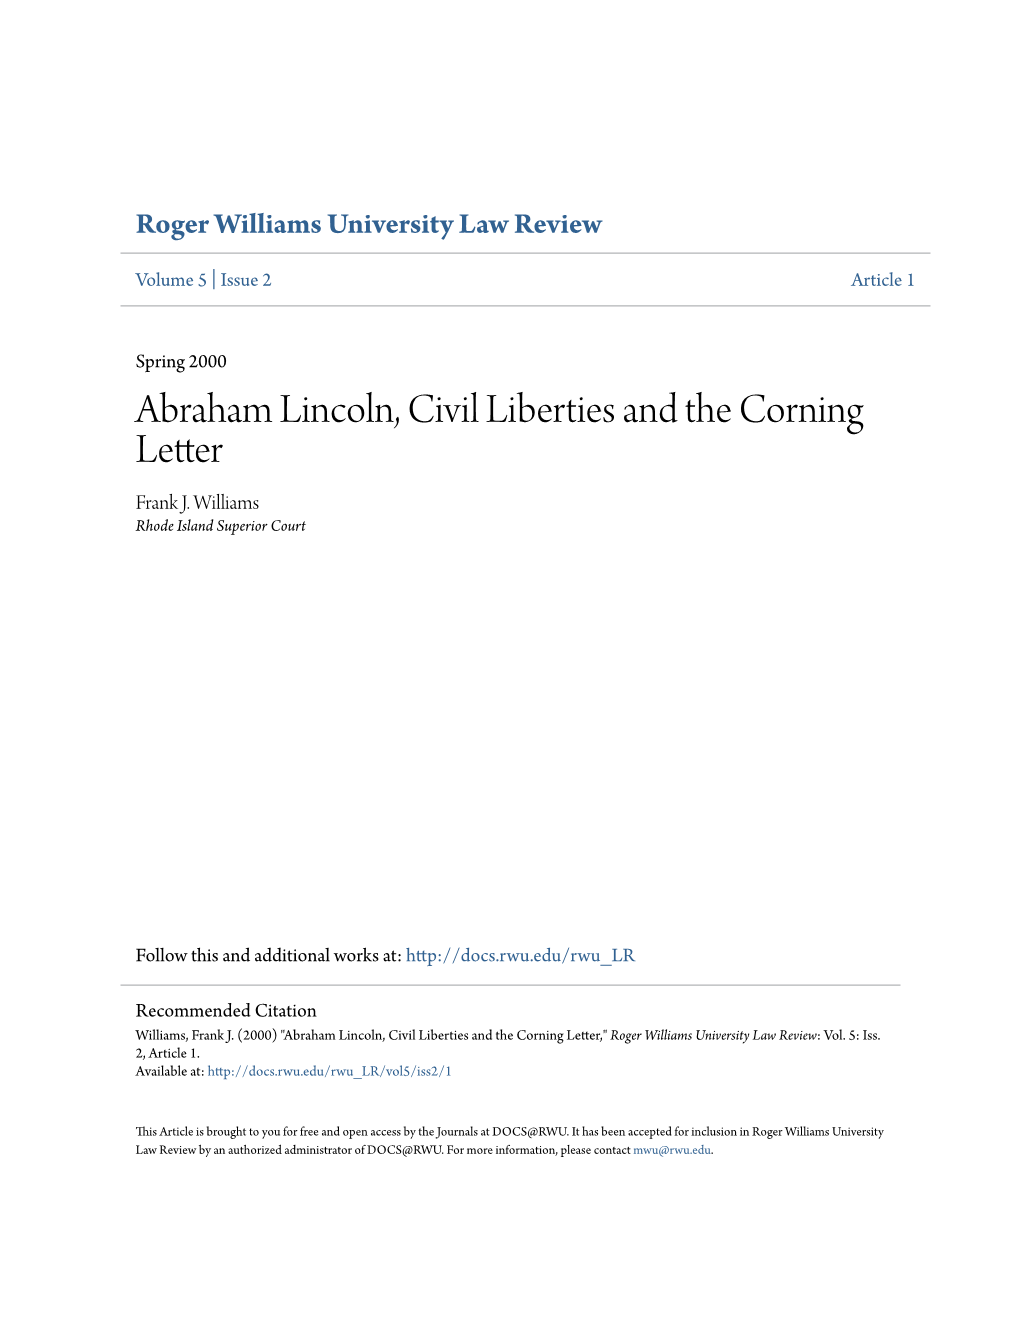 Abraham Lincoln, Civil Liberties and the Corning Letter Frank J